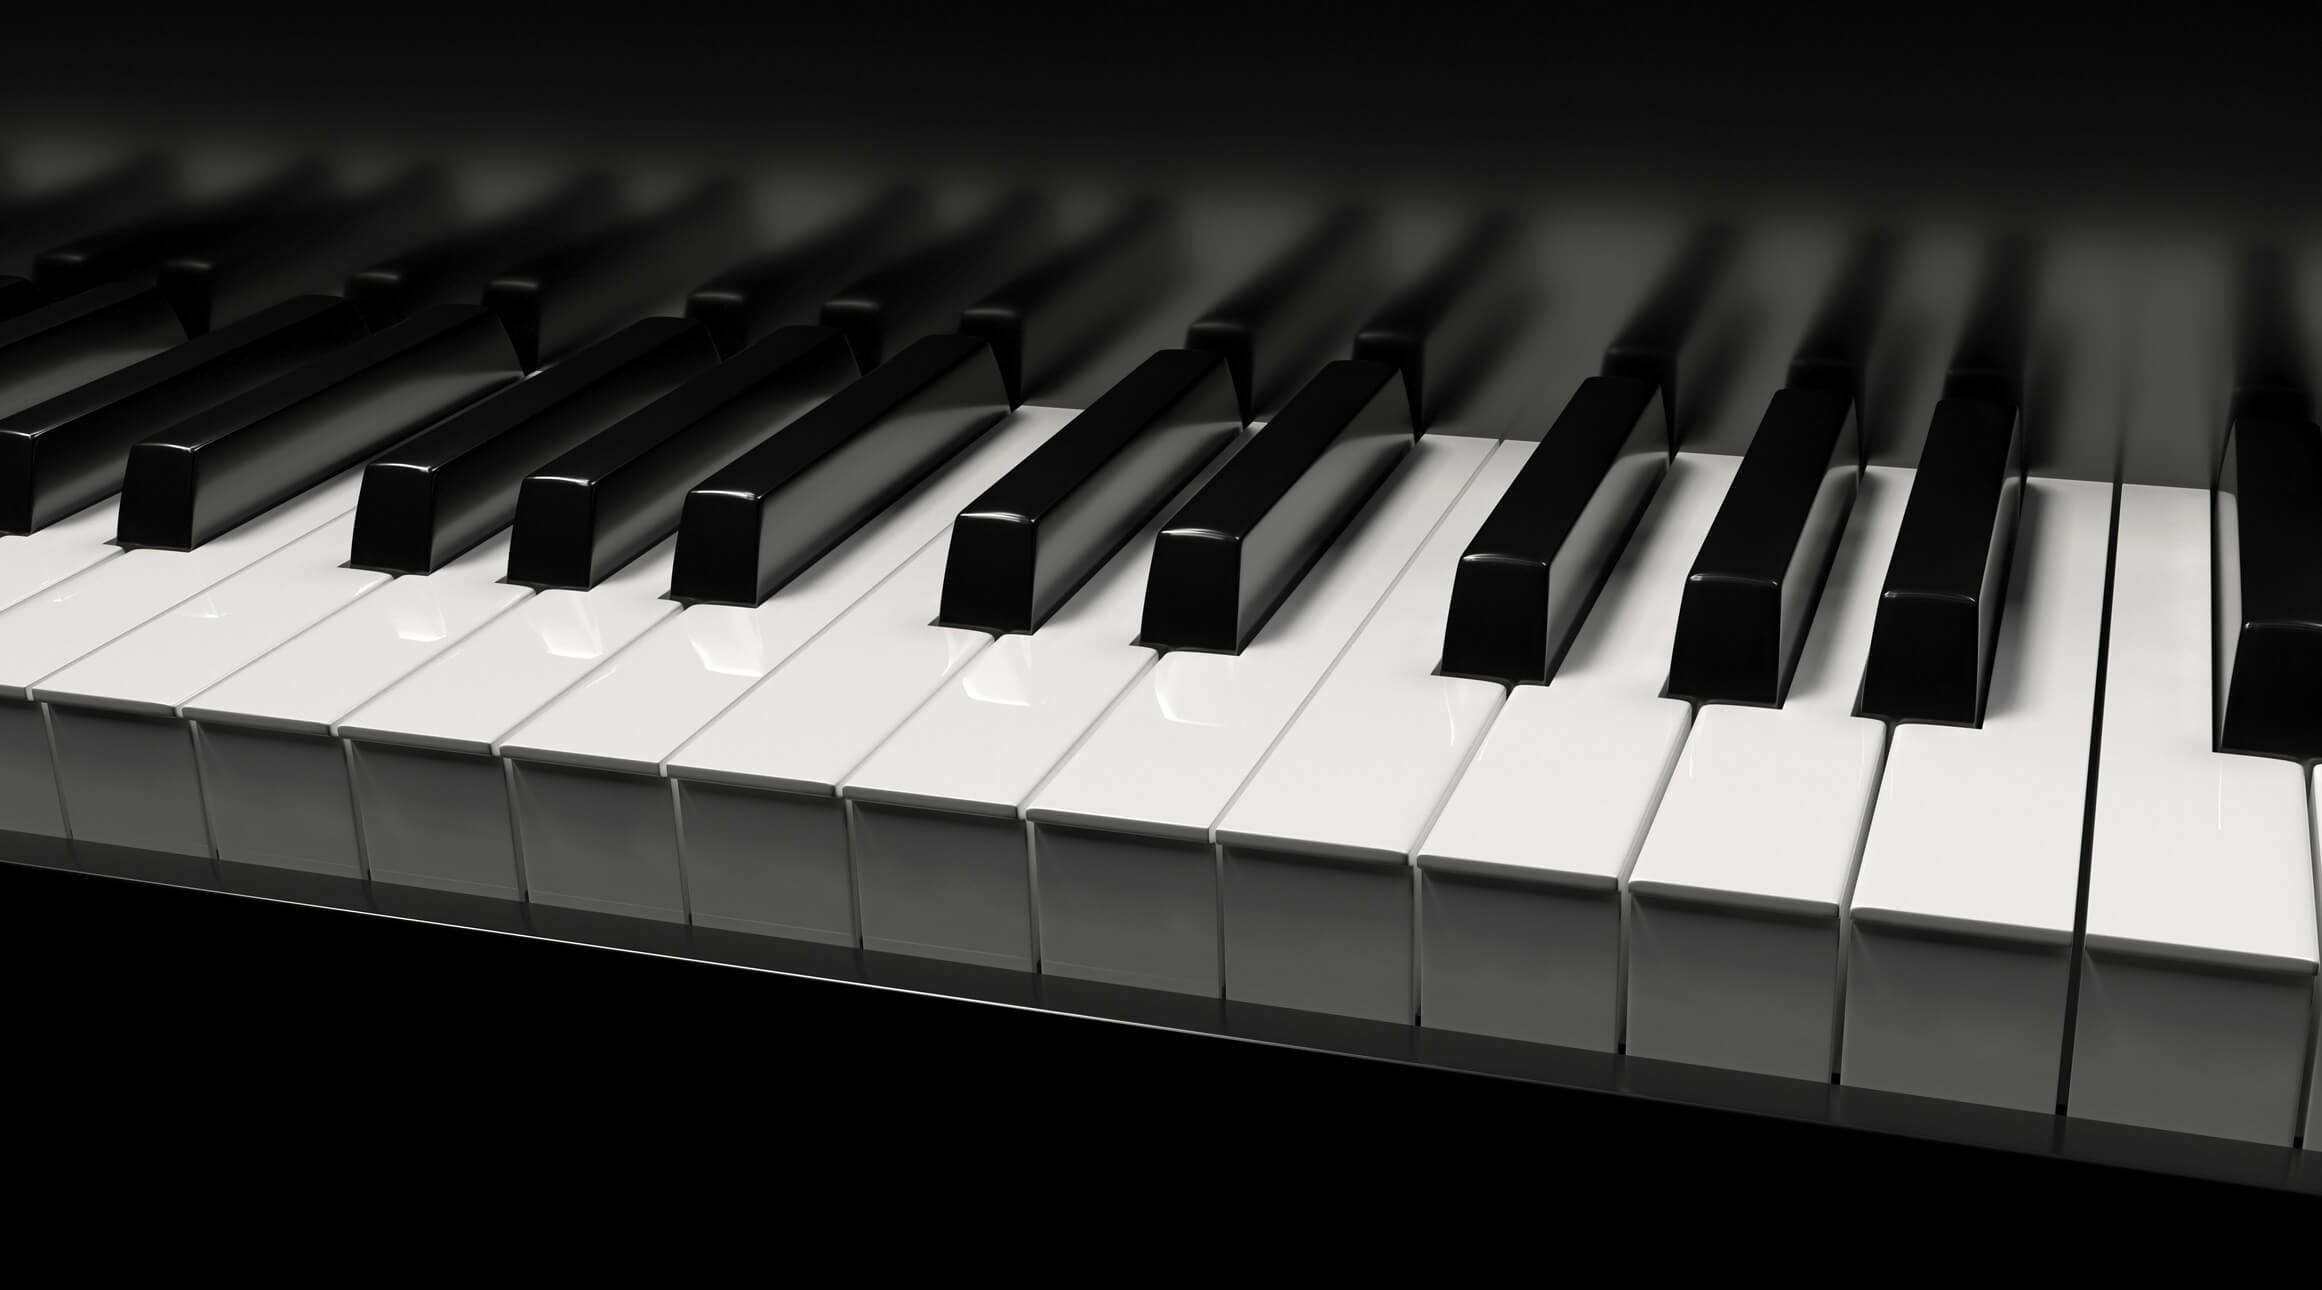 a close up of the keys on a black piano